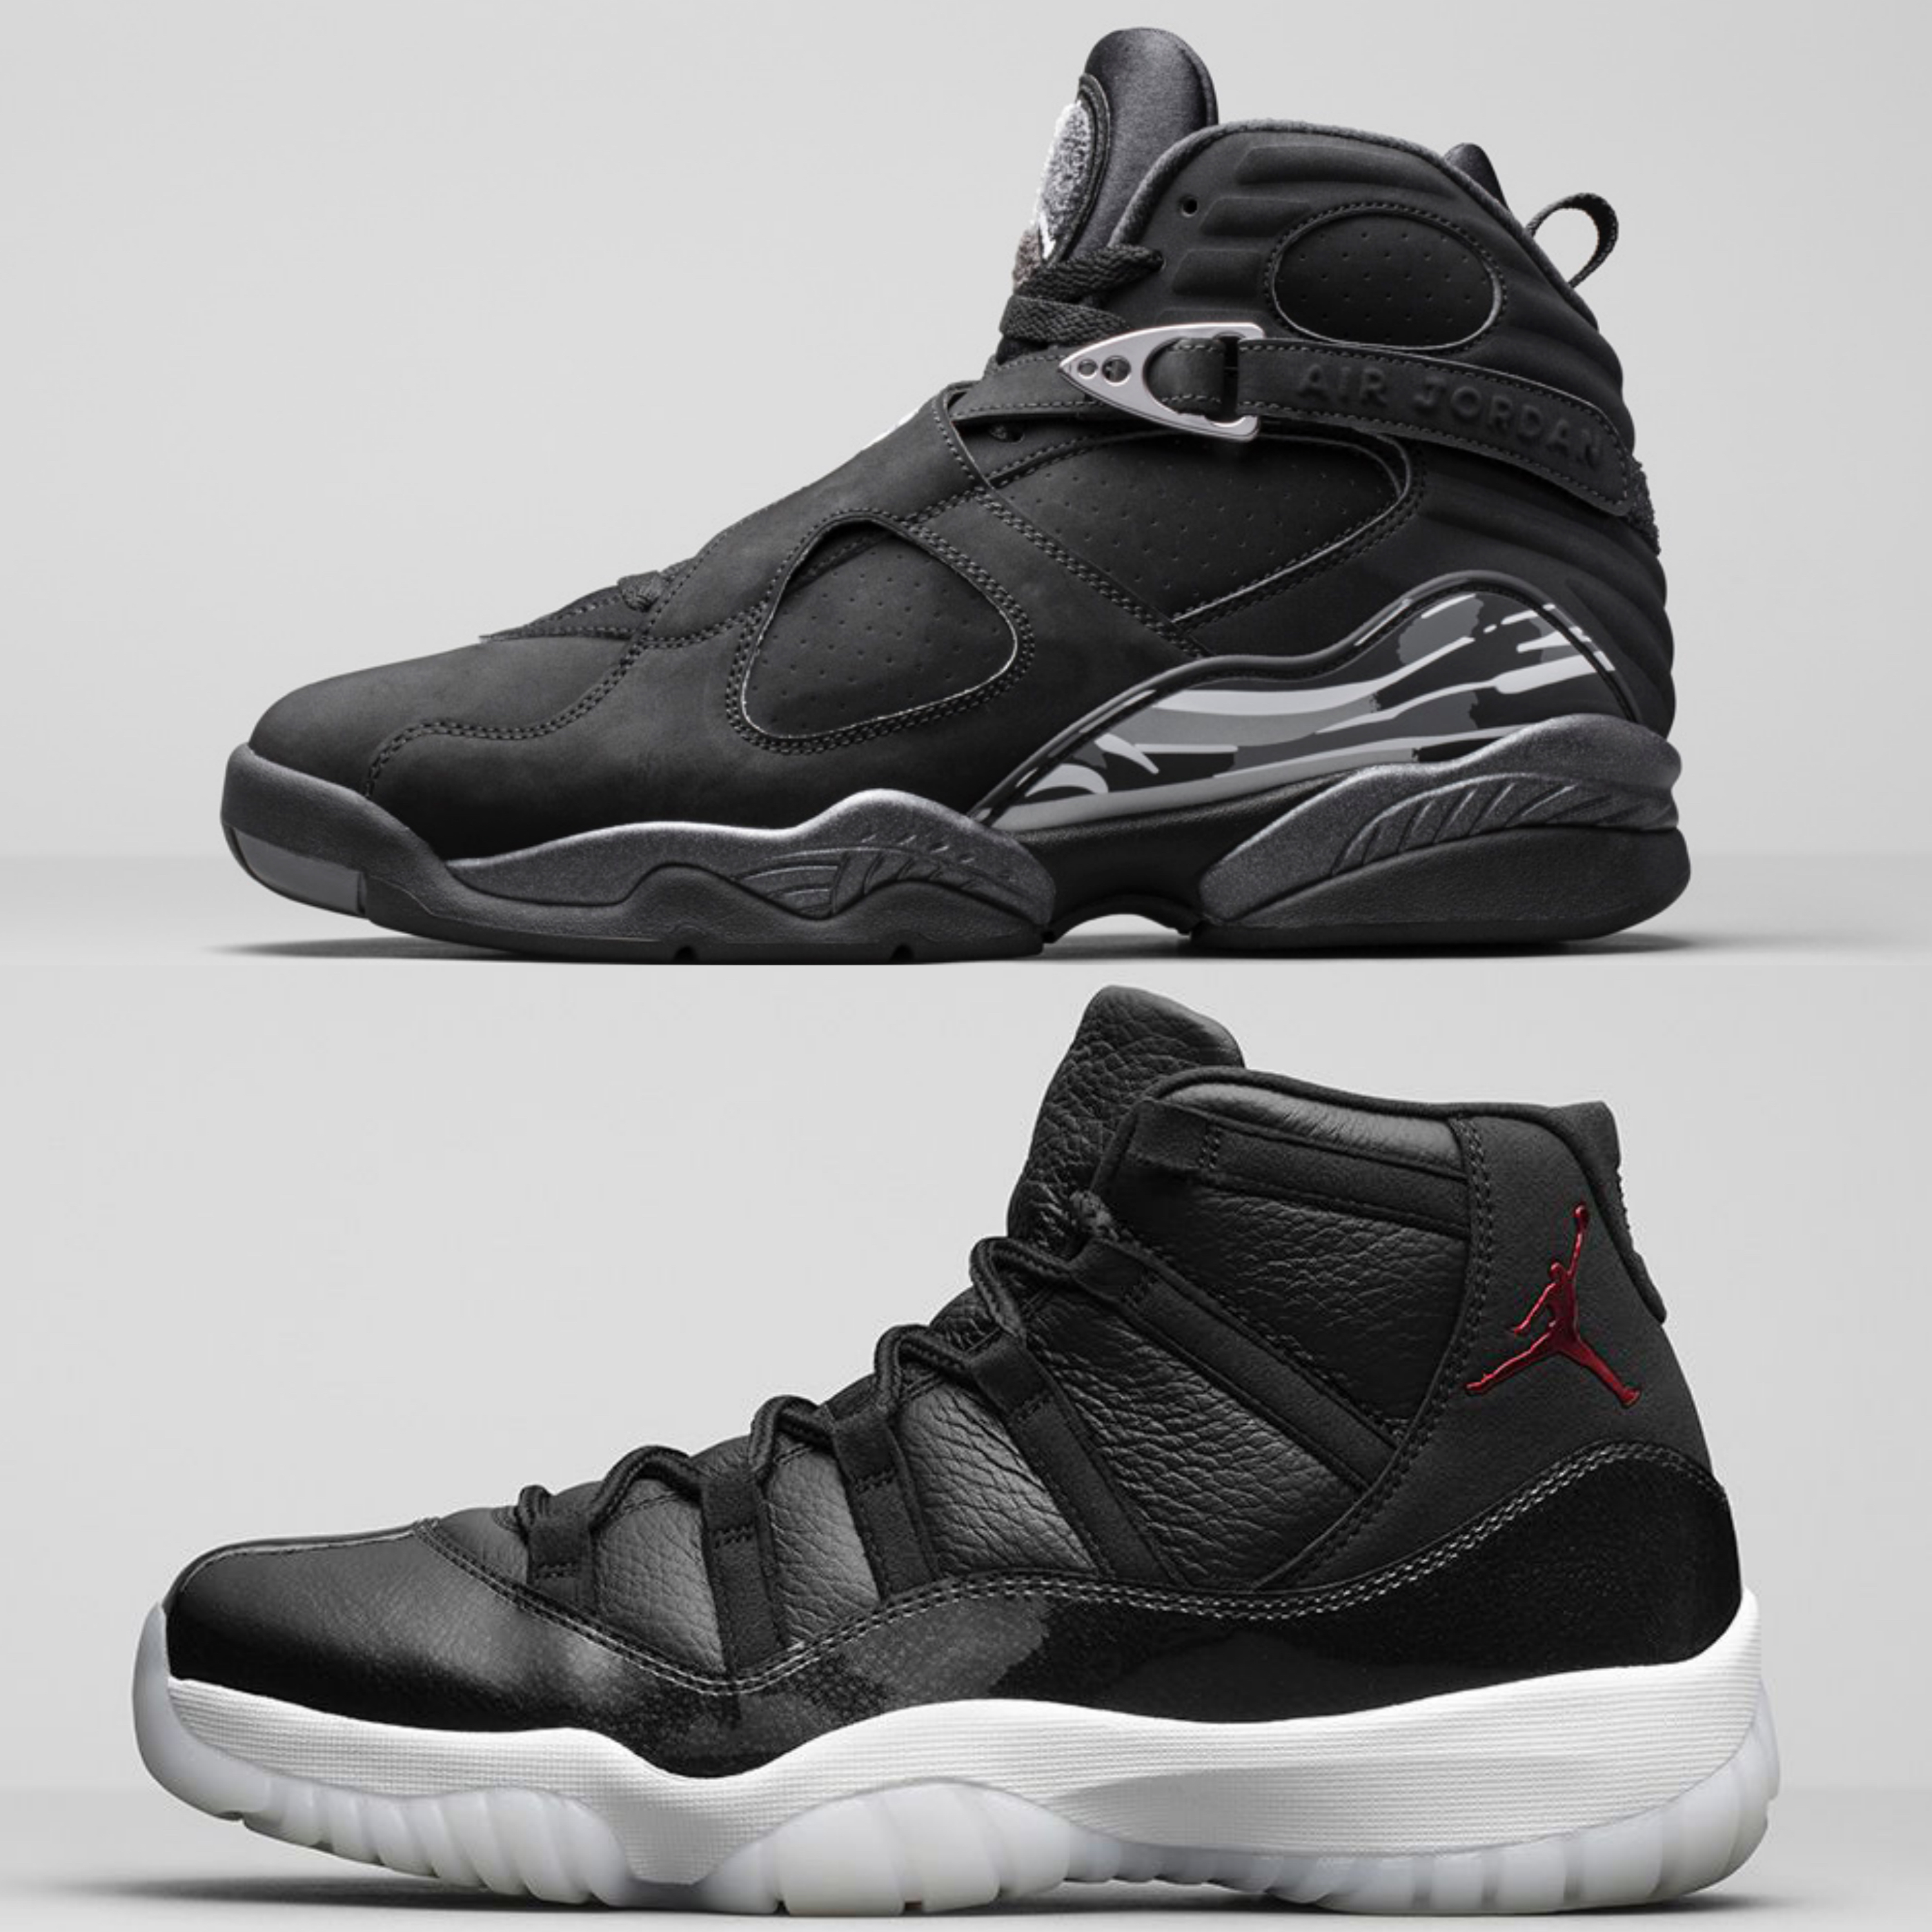 Air Jordan Retros With Release Date Changes WearTesters